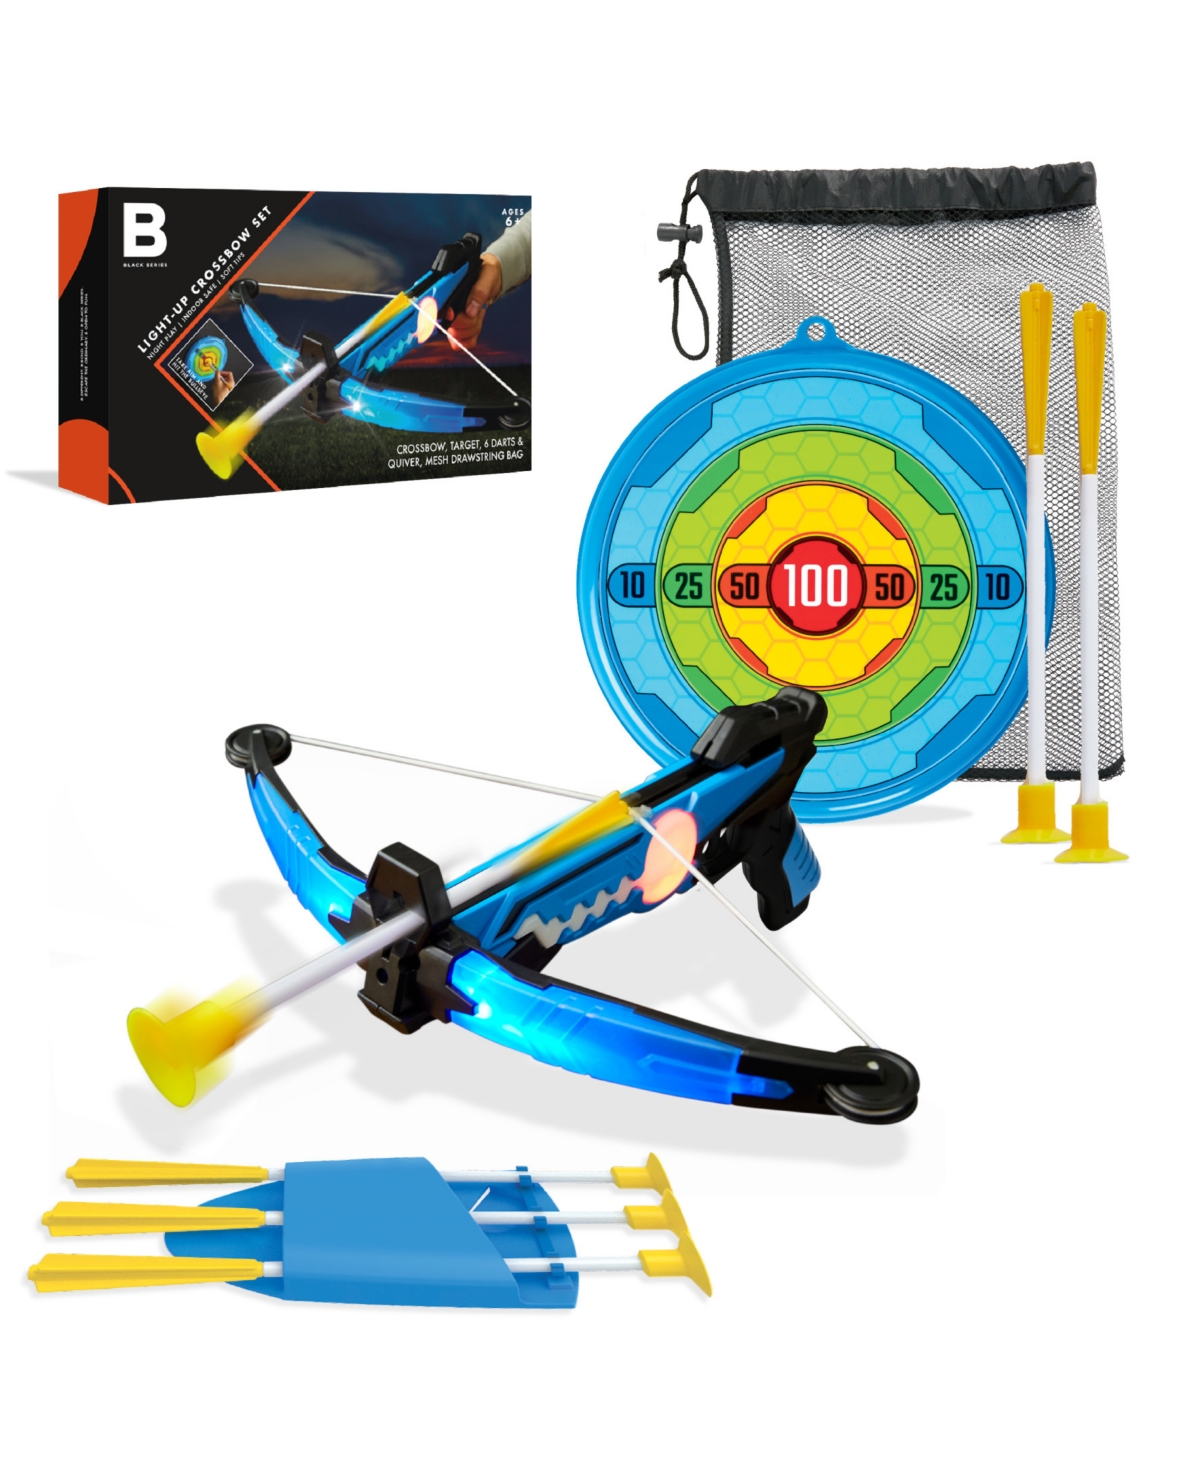 Black Series Light-up Crossbow Set, Led Glow Archery Game In Black